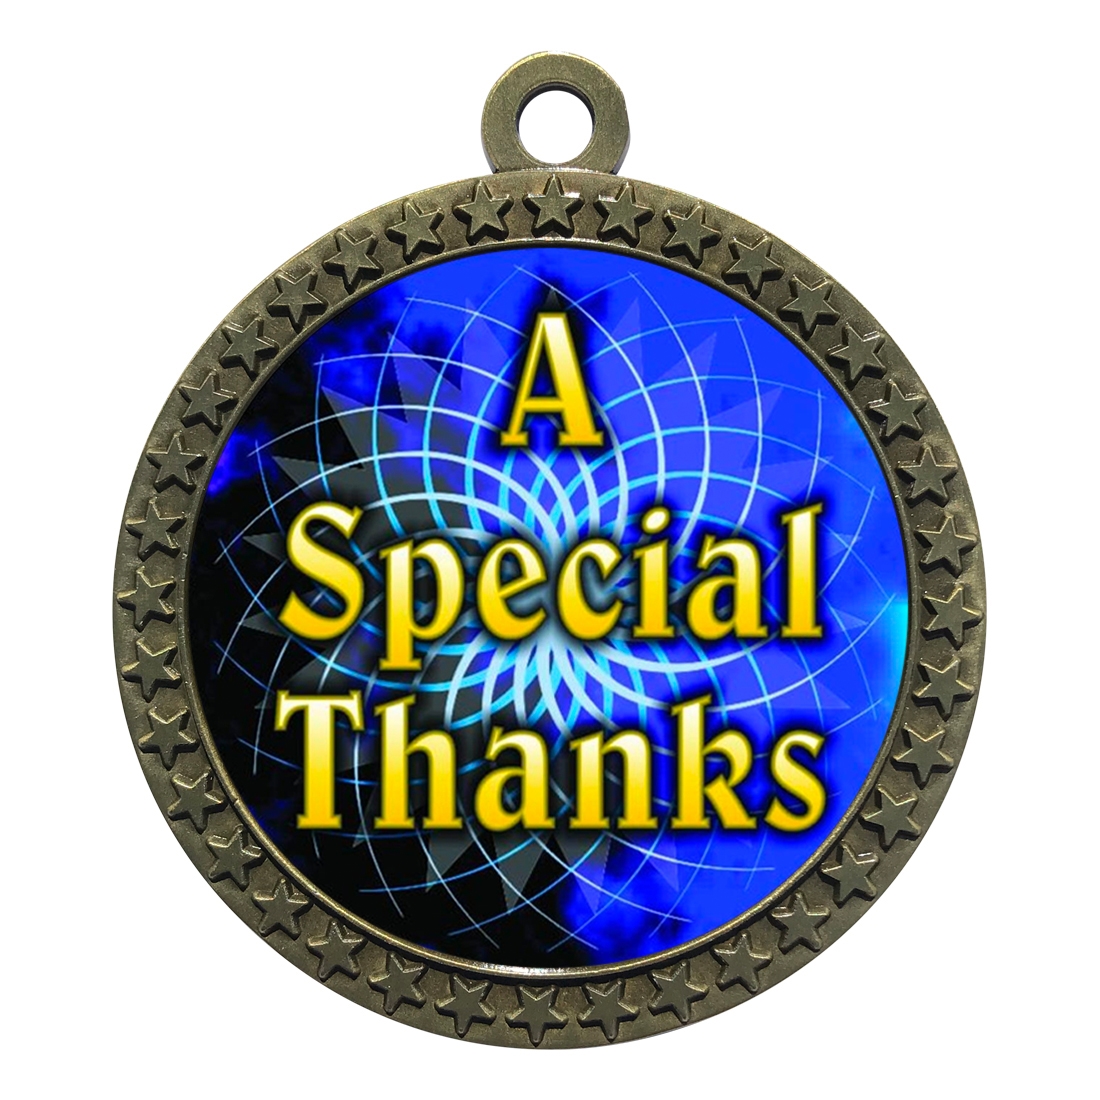 2-1/2" Special Thanks Medal